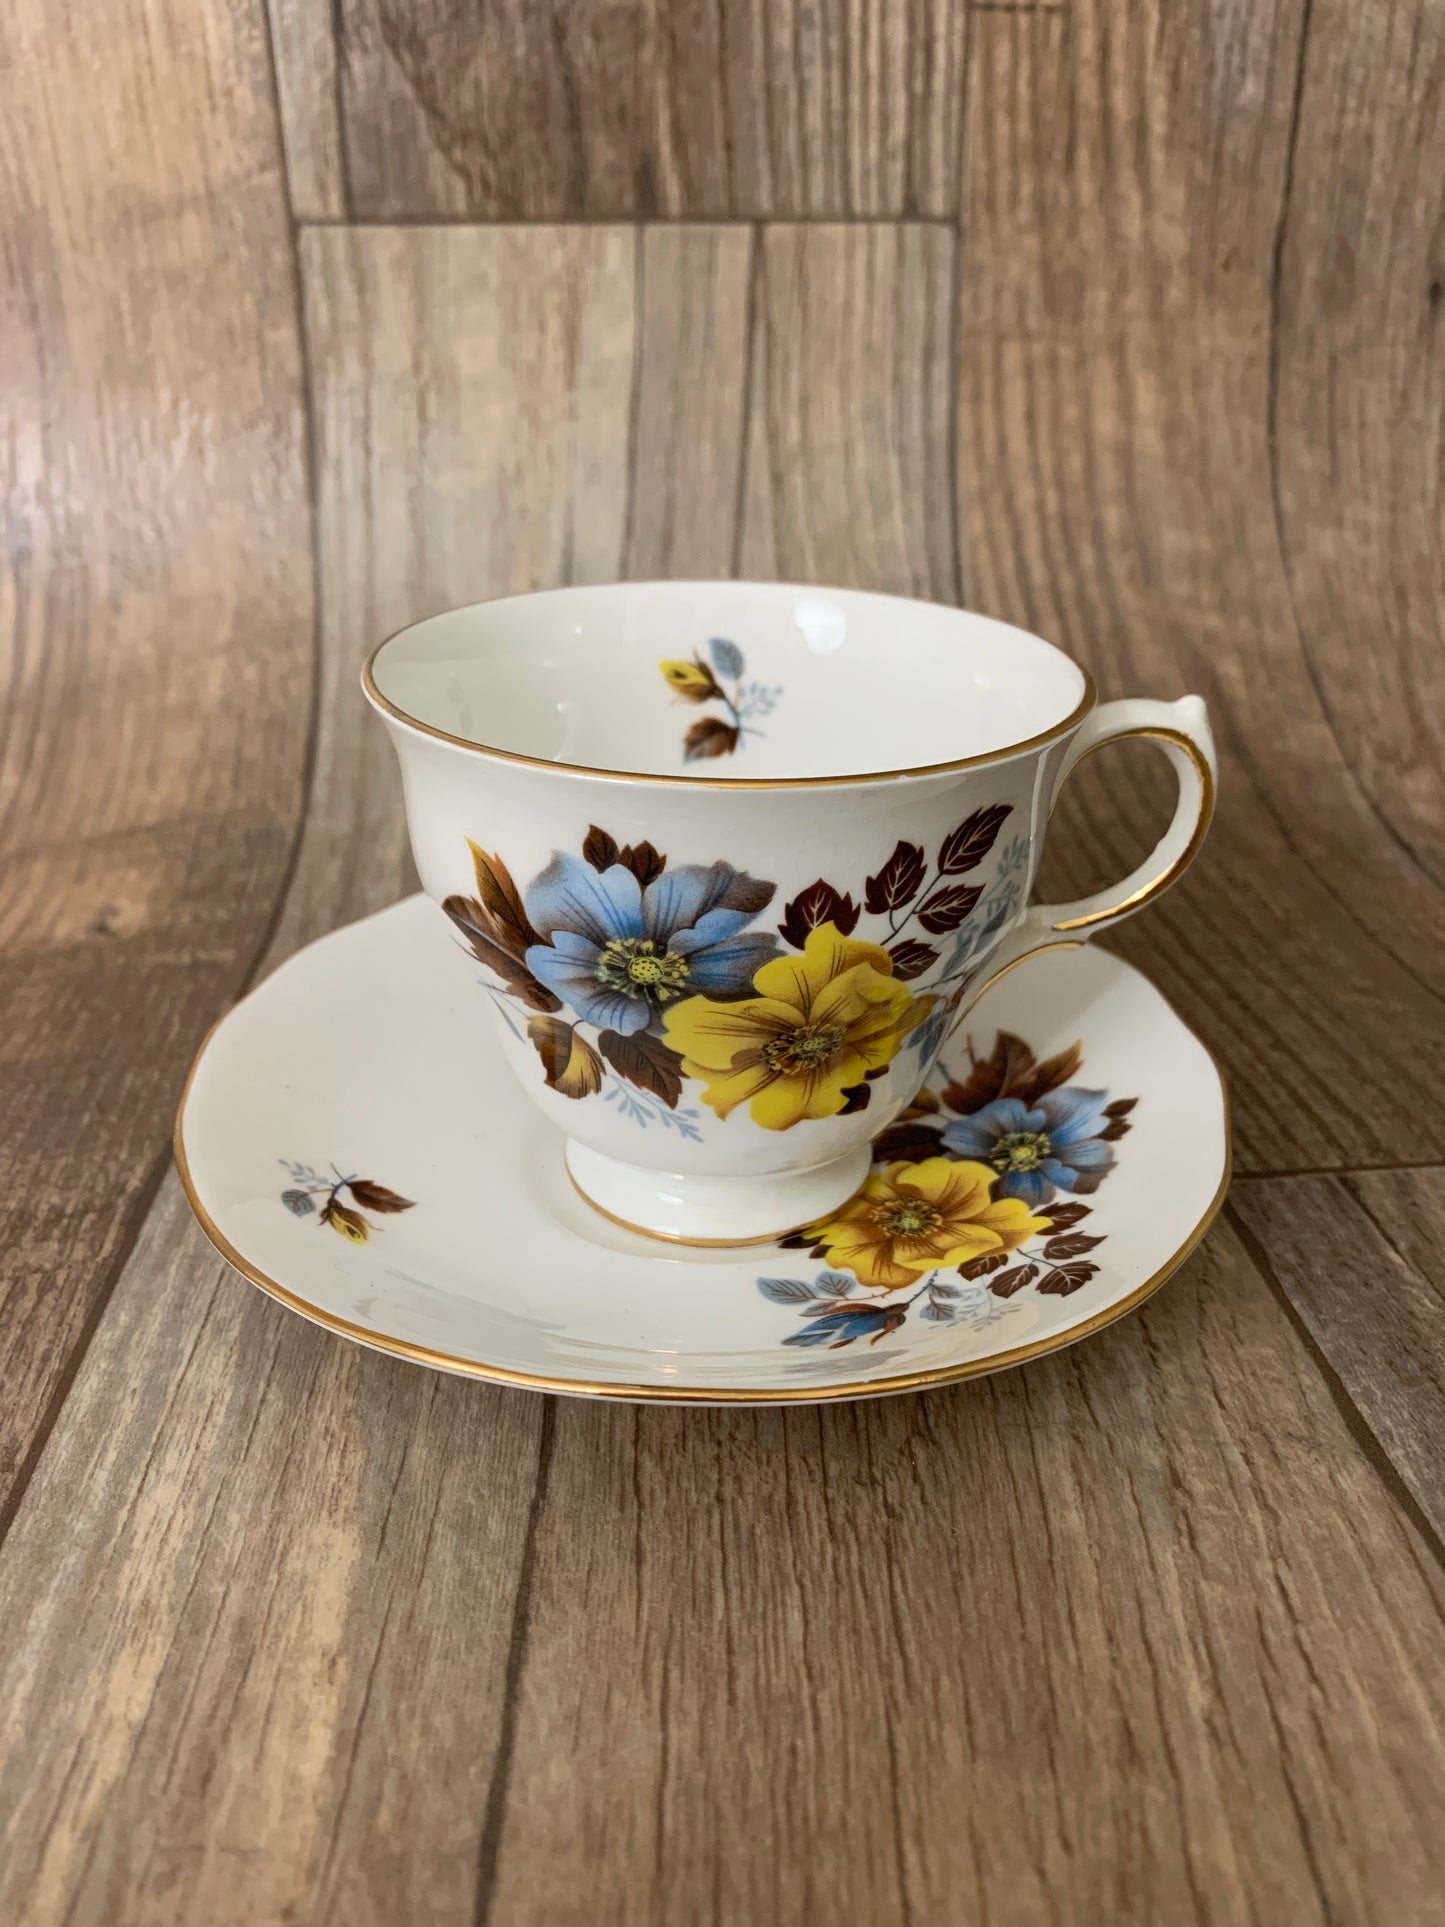 Vintage Floral Teacup Yellow and Blue Pattern Royal Vale Vintage English Tea Cup